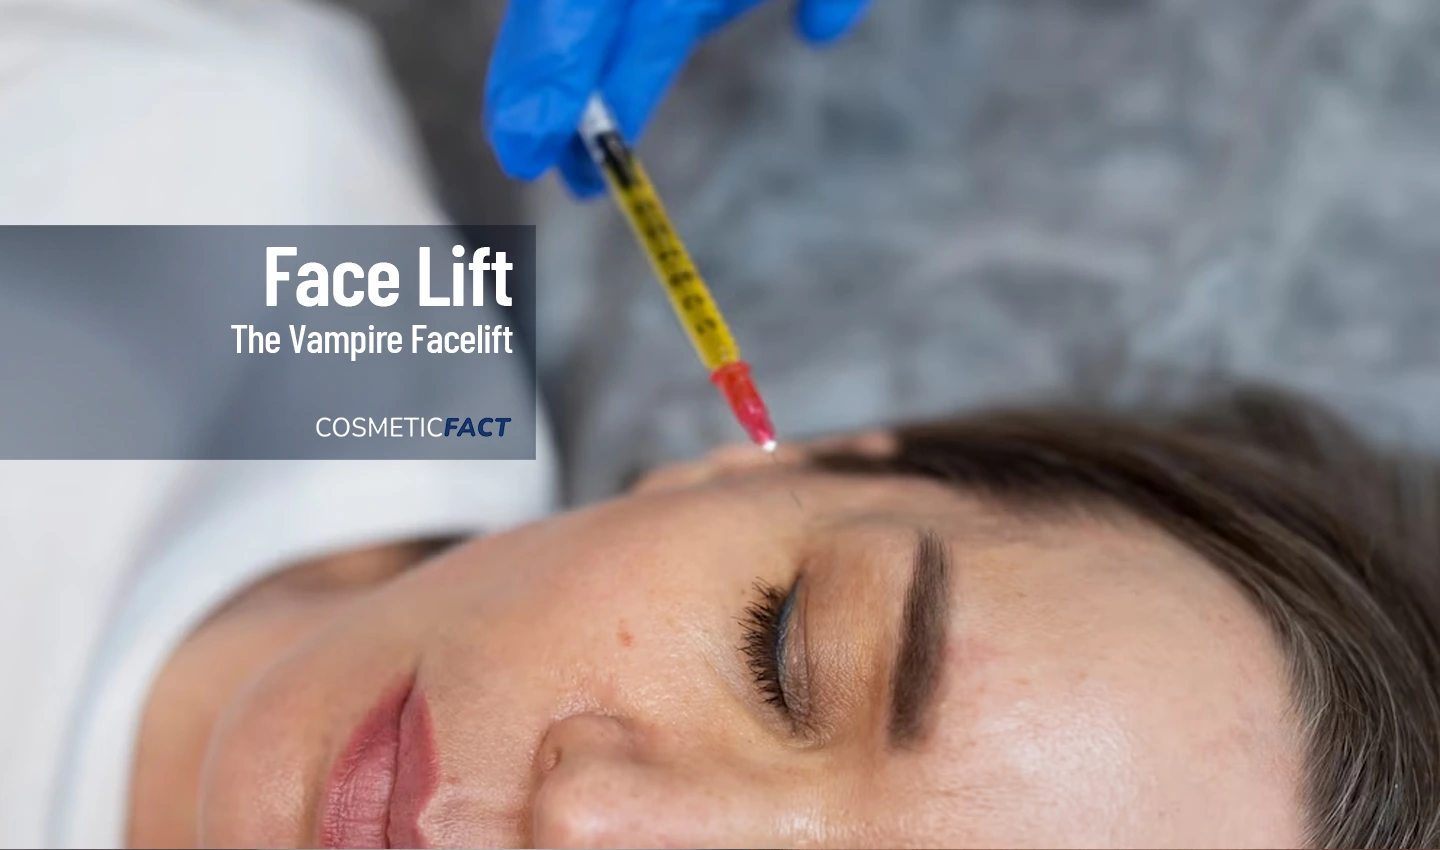 A woman receiving the Vampire Facelift treatment, with platelet-rich plasma being injected into her scalp.